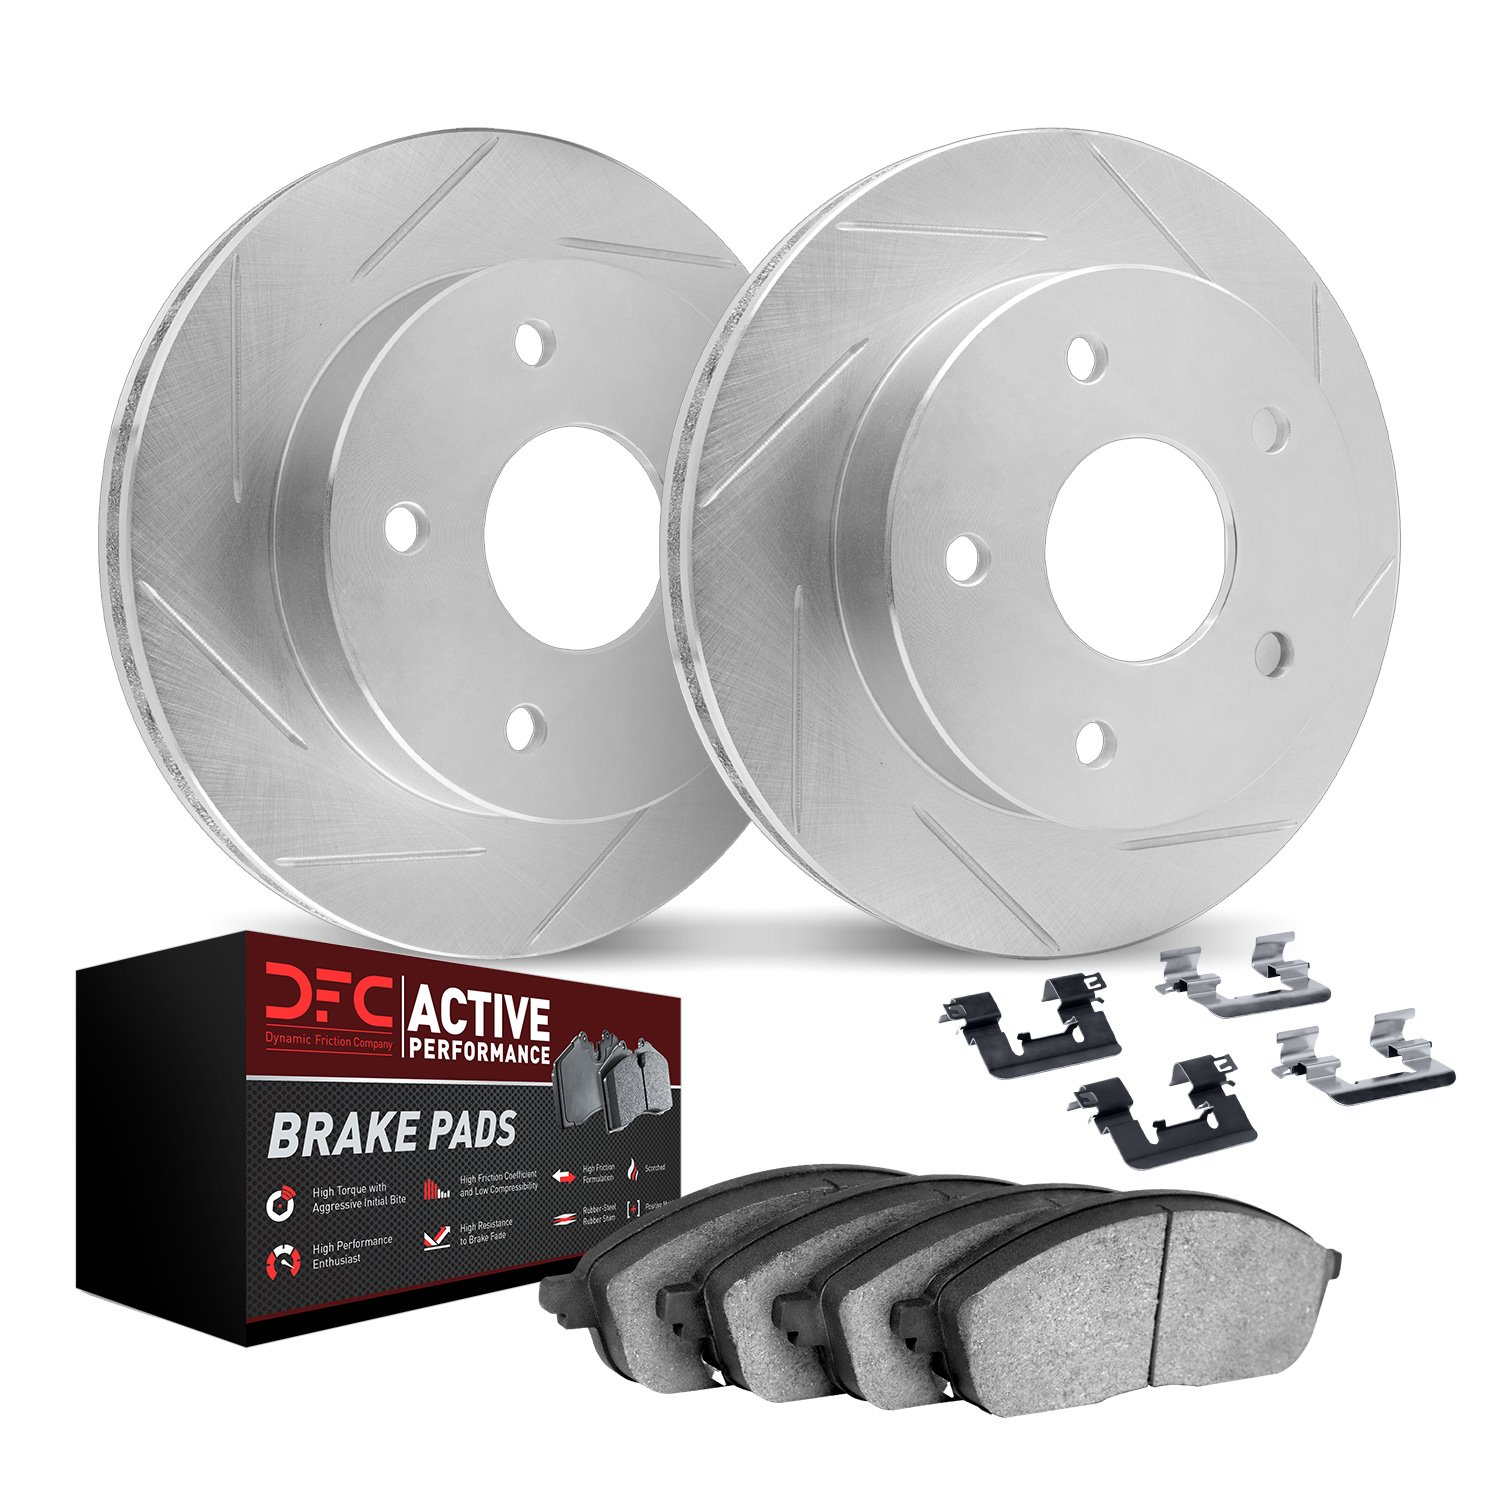 2712-39002 Geoperformance Slotted Brake Rotors with Active Performance Pads Kits & Hardware, Fits Select Multiple Makes/Models,